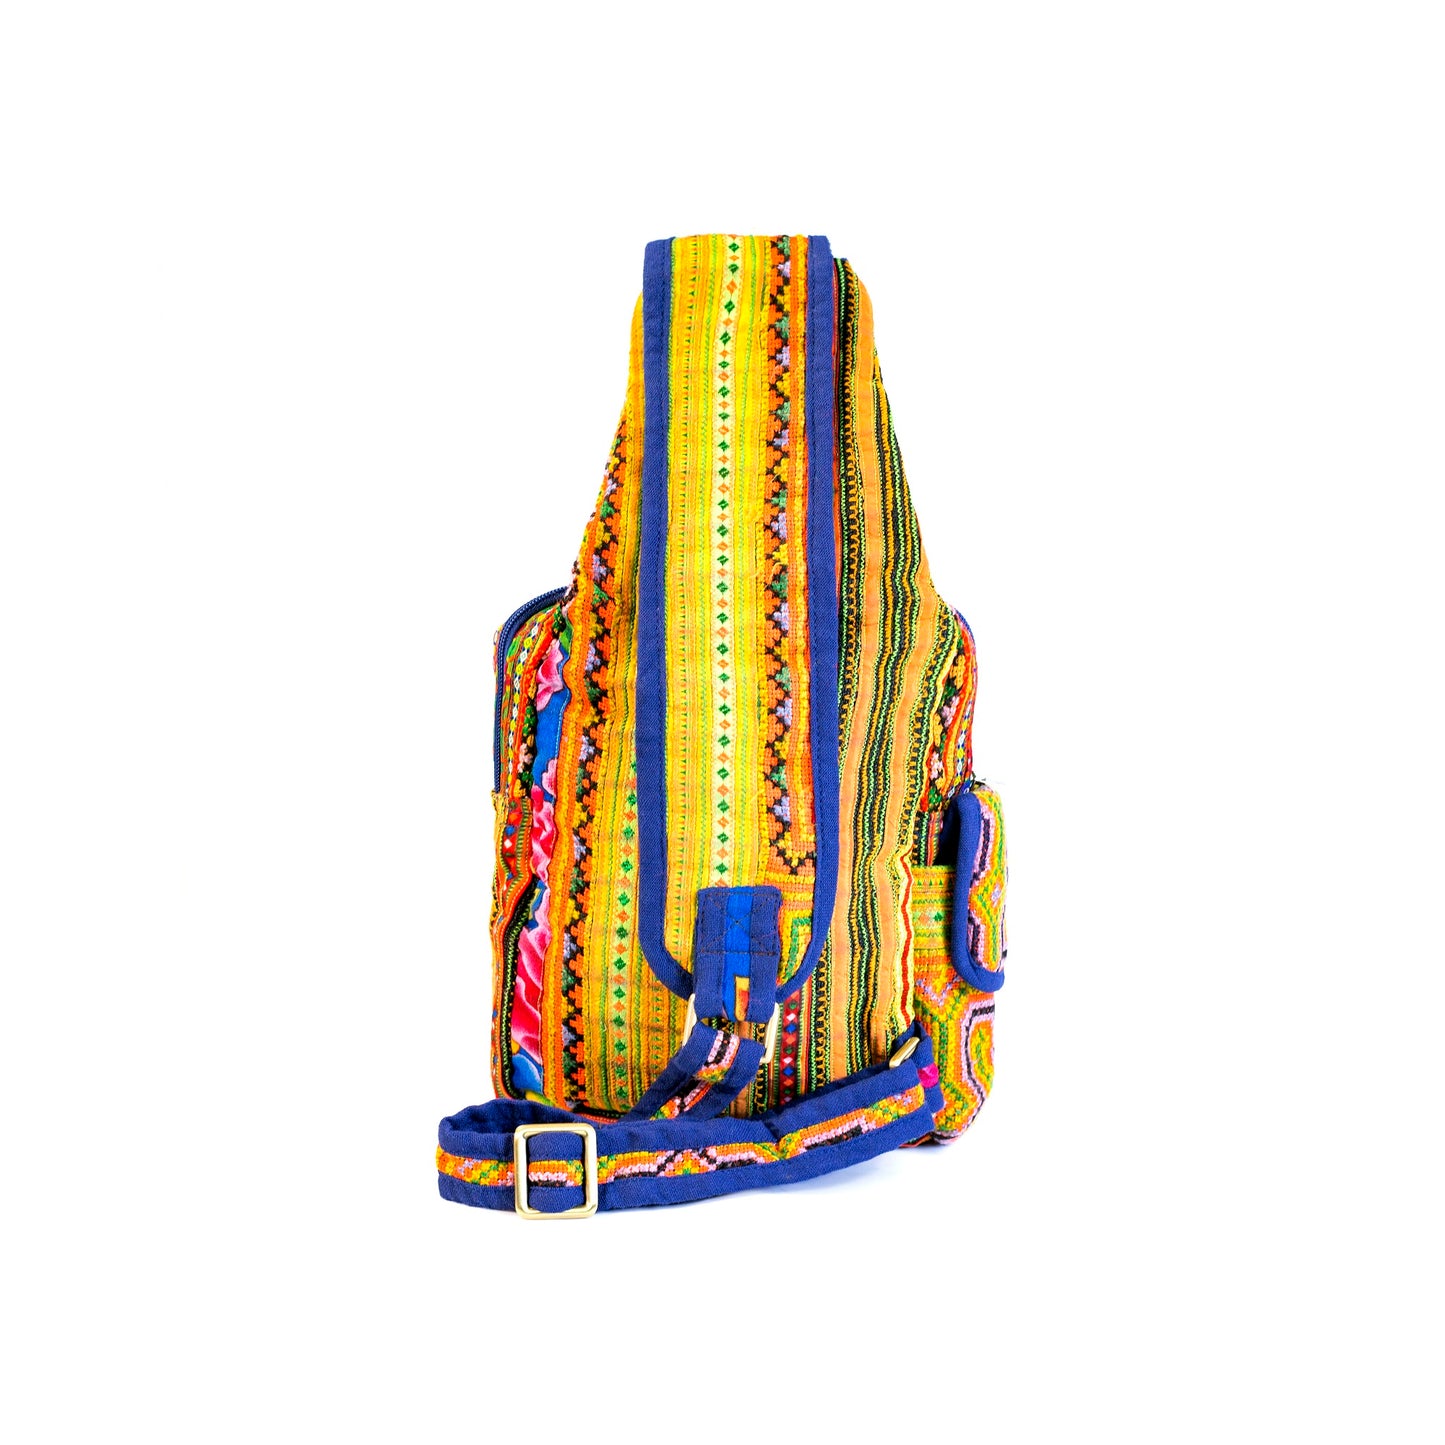 Boho-style linen, embroidery Sling bag, H'mong tribal pattern in ORANGE silk thread and blue rim